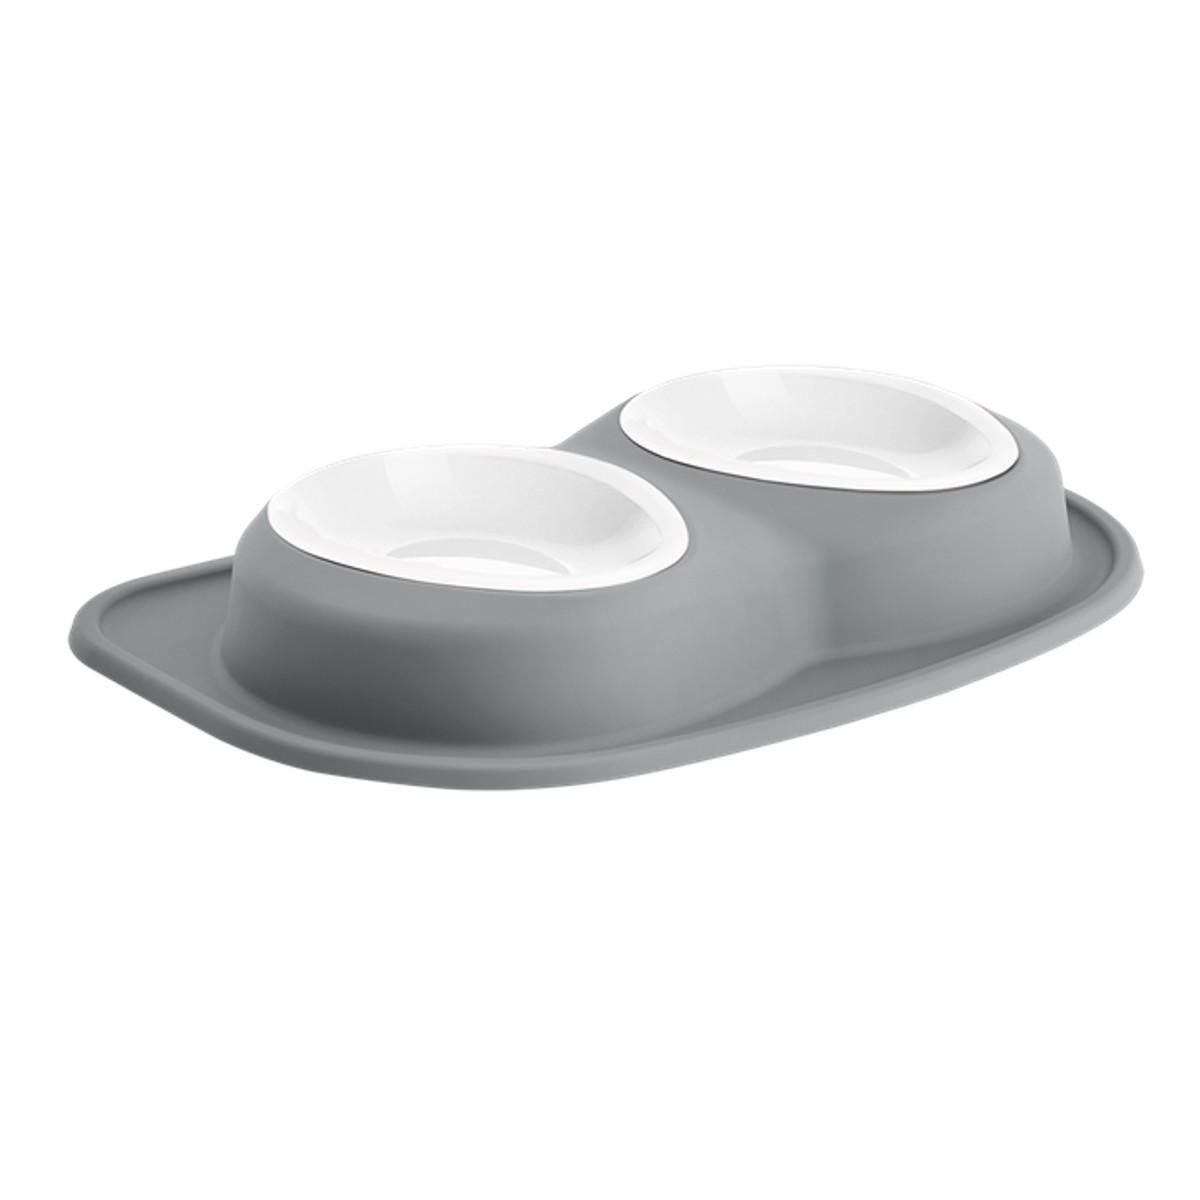 https://images.baxterboo.com/global/images/products/large/weathertech-low-double-diner-with-stainless-steel-dog-bowls-dark-gray-4693.jpg